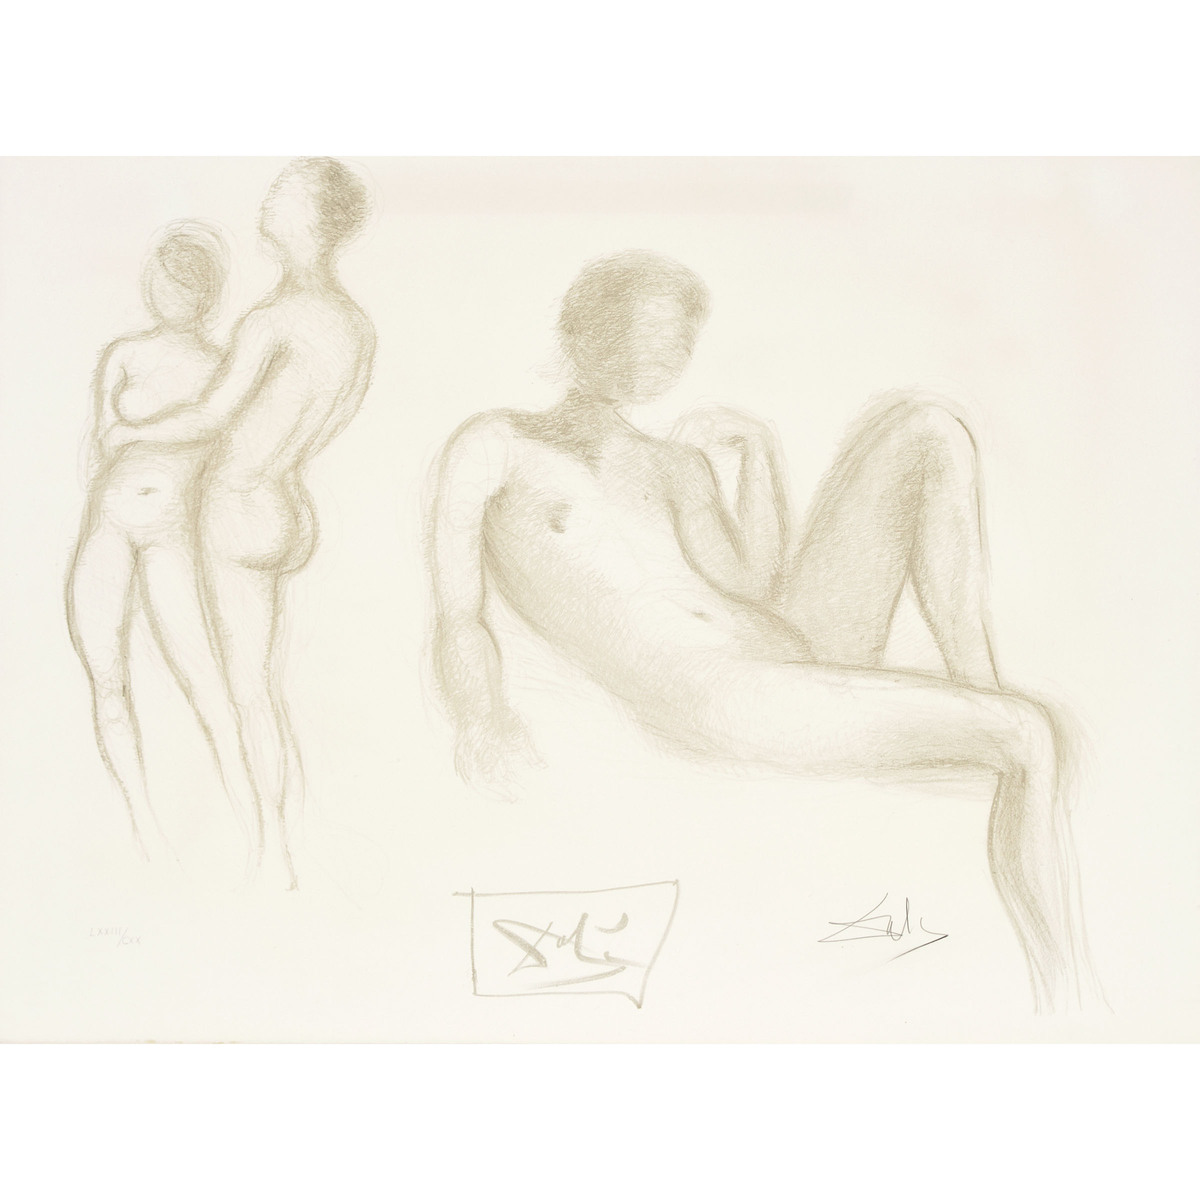 Salvador Dalí (1904-1989), COUPLE NUS, FROM “NUDES” PORTFOLIO, 1970 [F. 70-8 E], signed and numbered